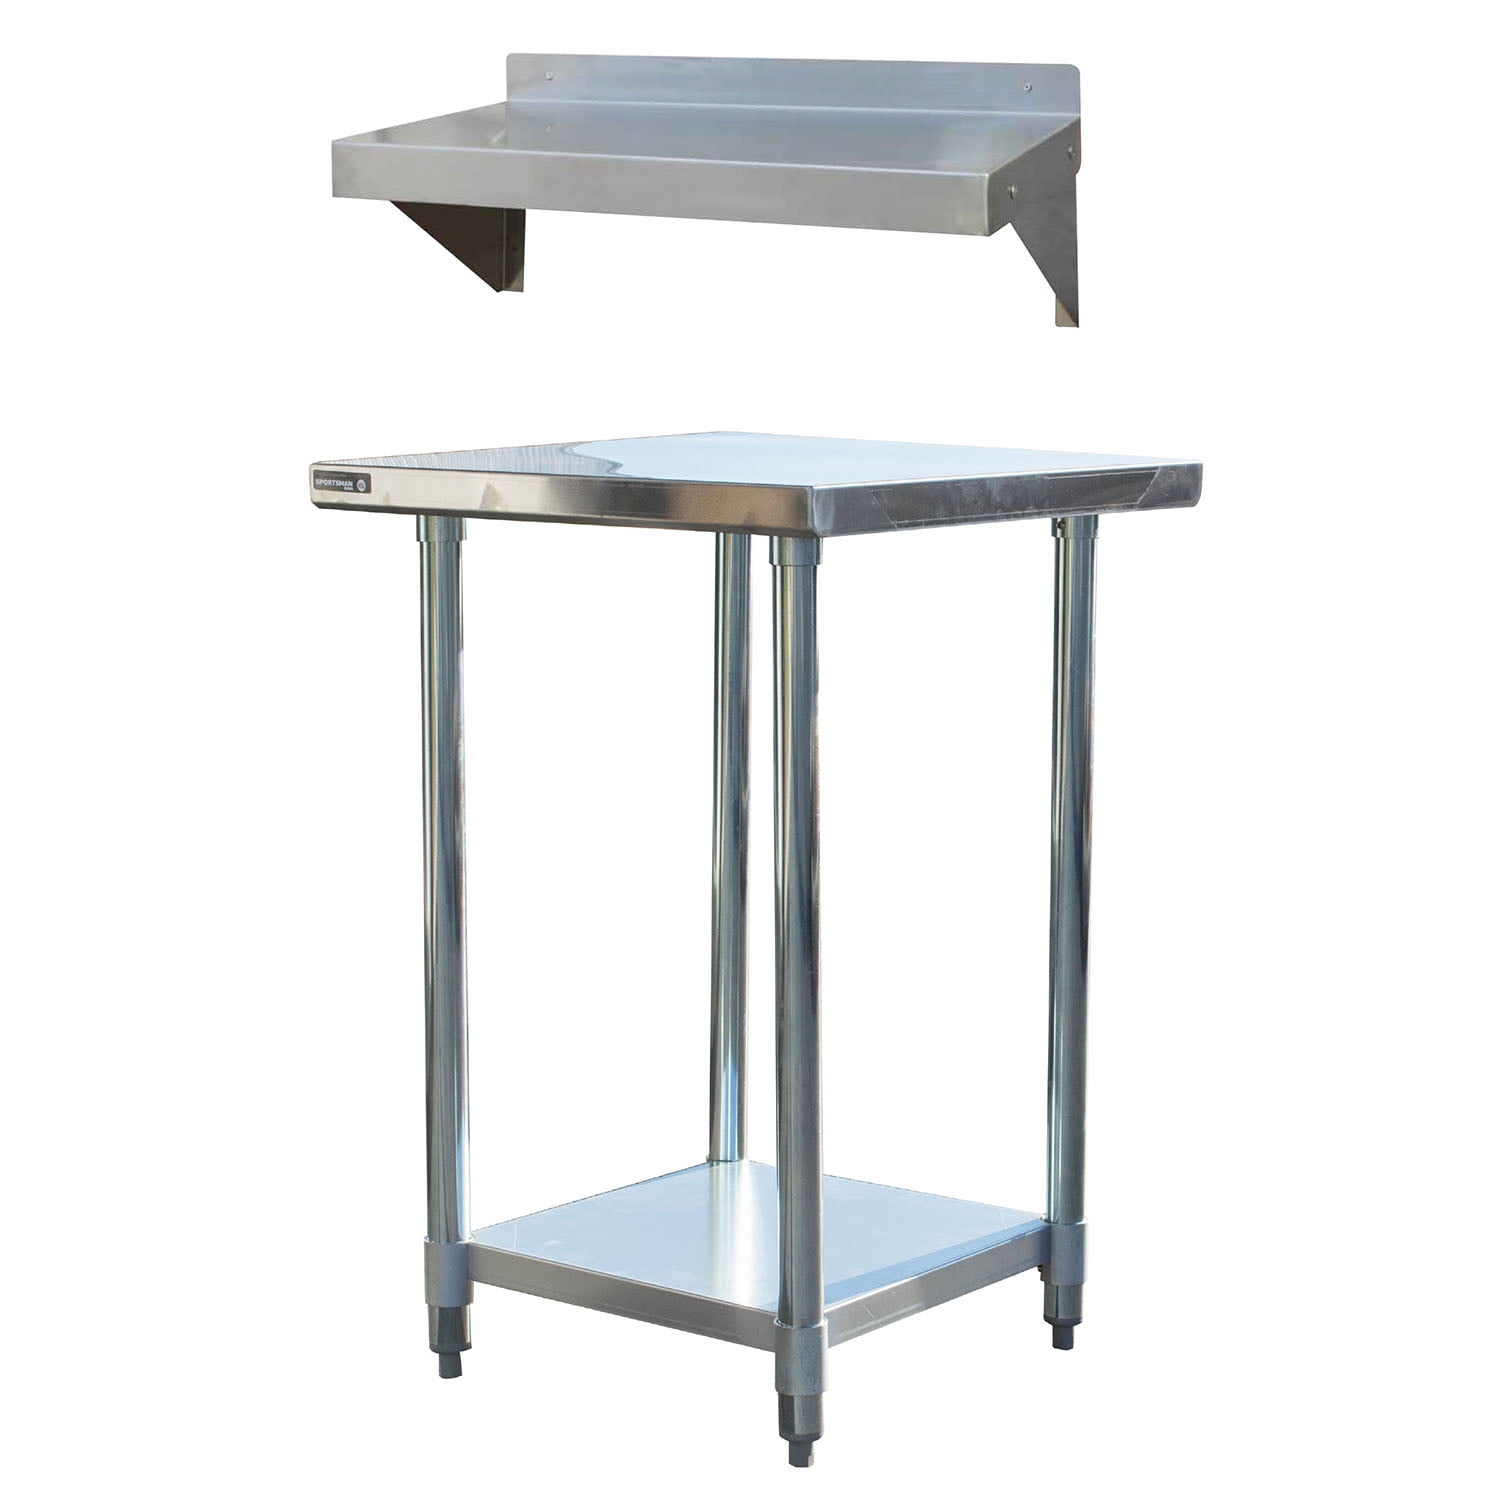 BOOK PUBLISHING COMPANY 24 in. Stainless Steel Work Station with Workbench Table & Utility Shelf - 24 in. - Silver